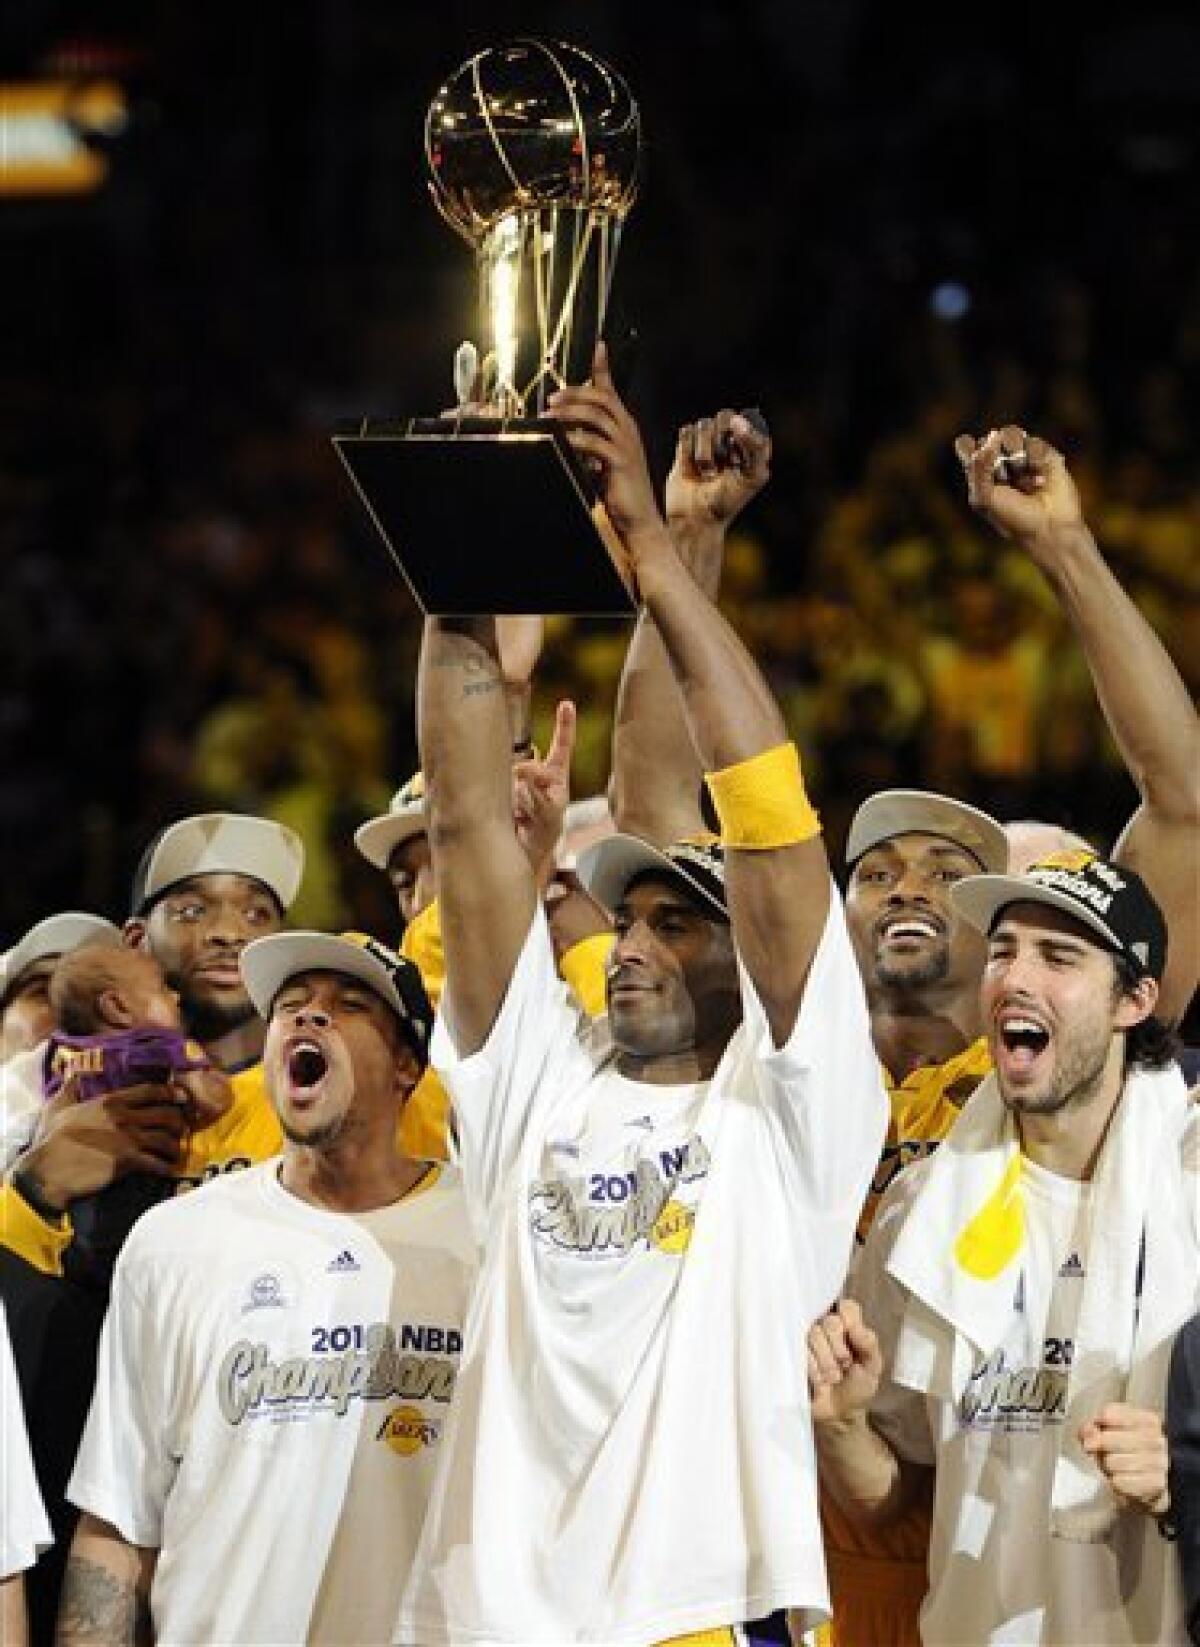 Lakers win NBA title in Game Seven thriller